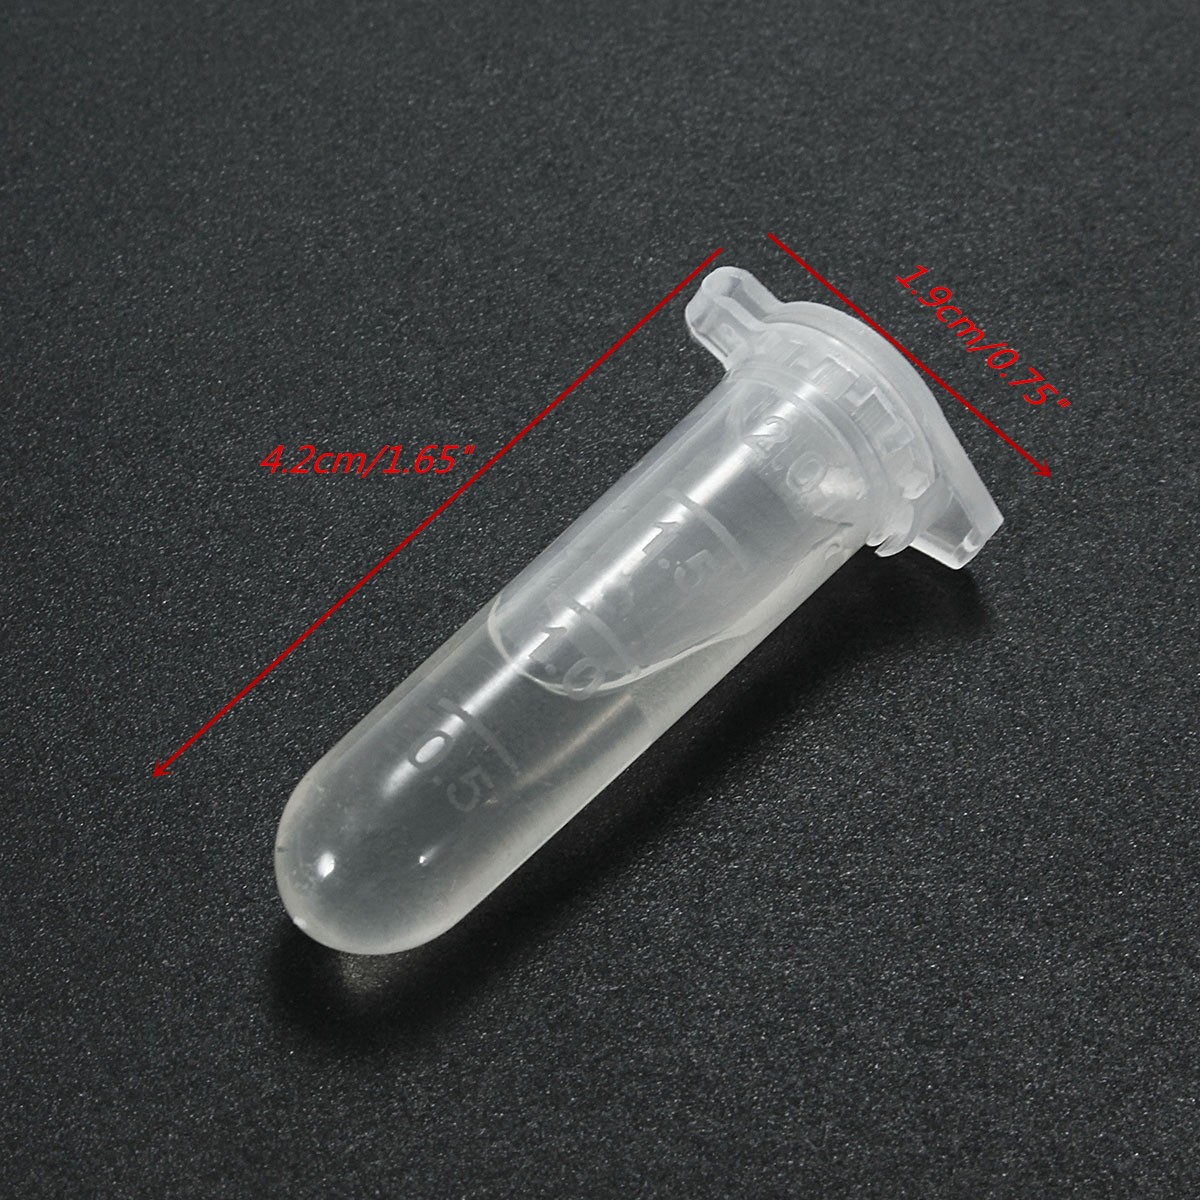 2ml Test Tube Centrifuge Vial Clear Plastic with Snap Cap for Lab Laboratory